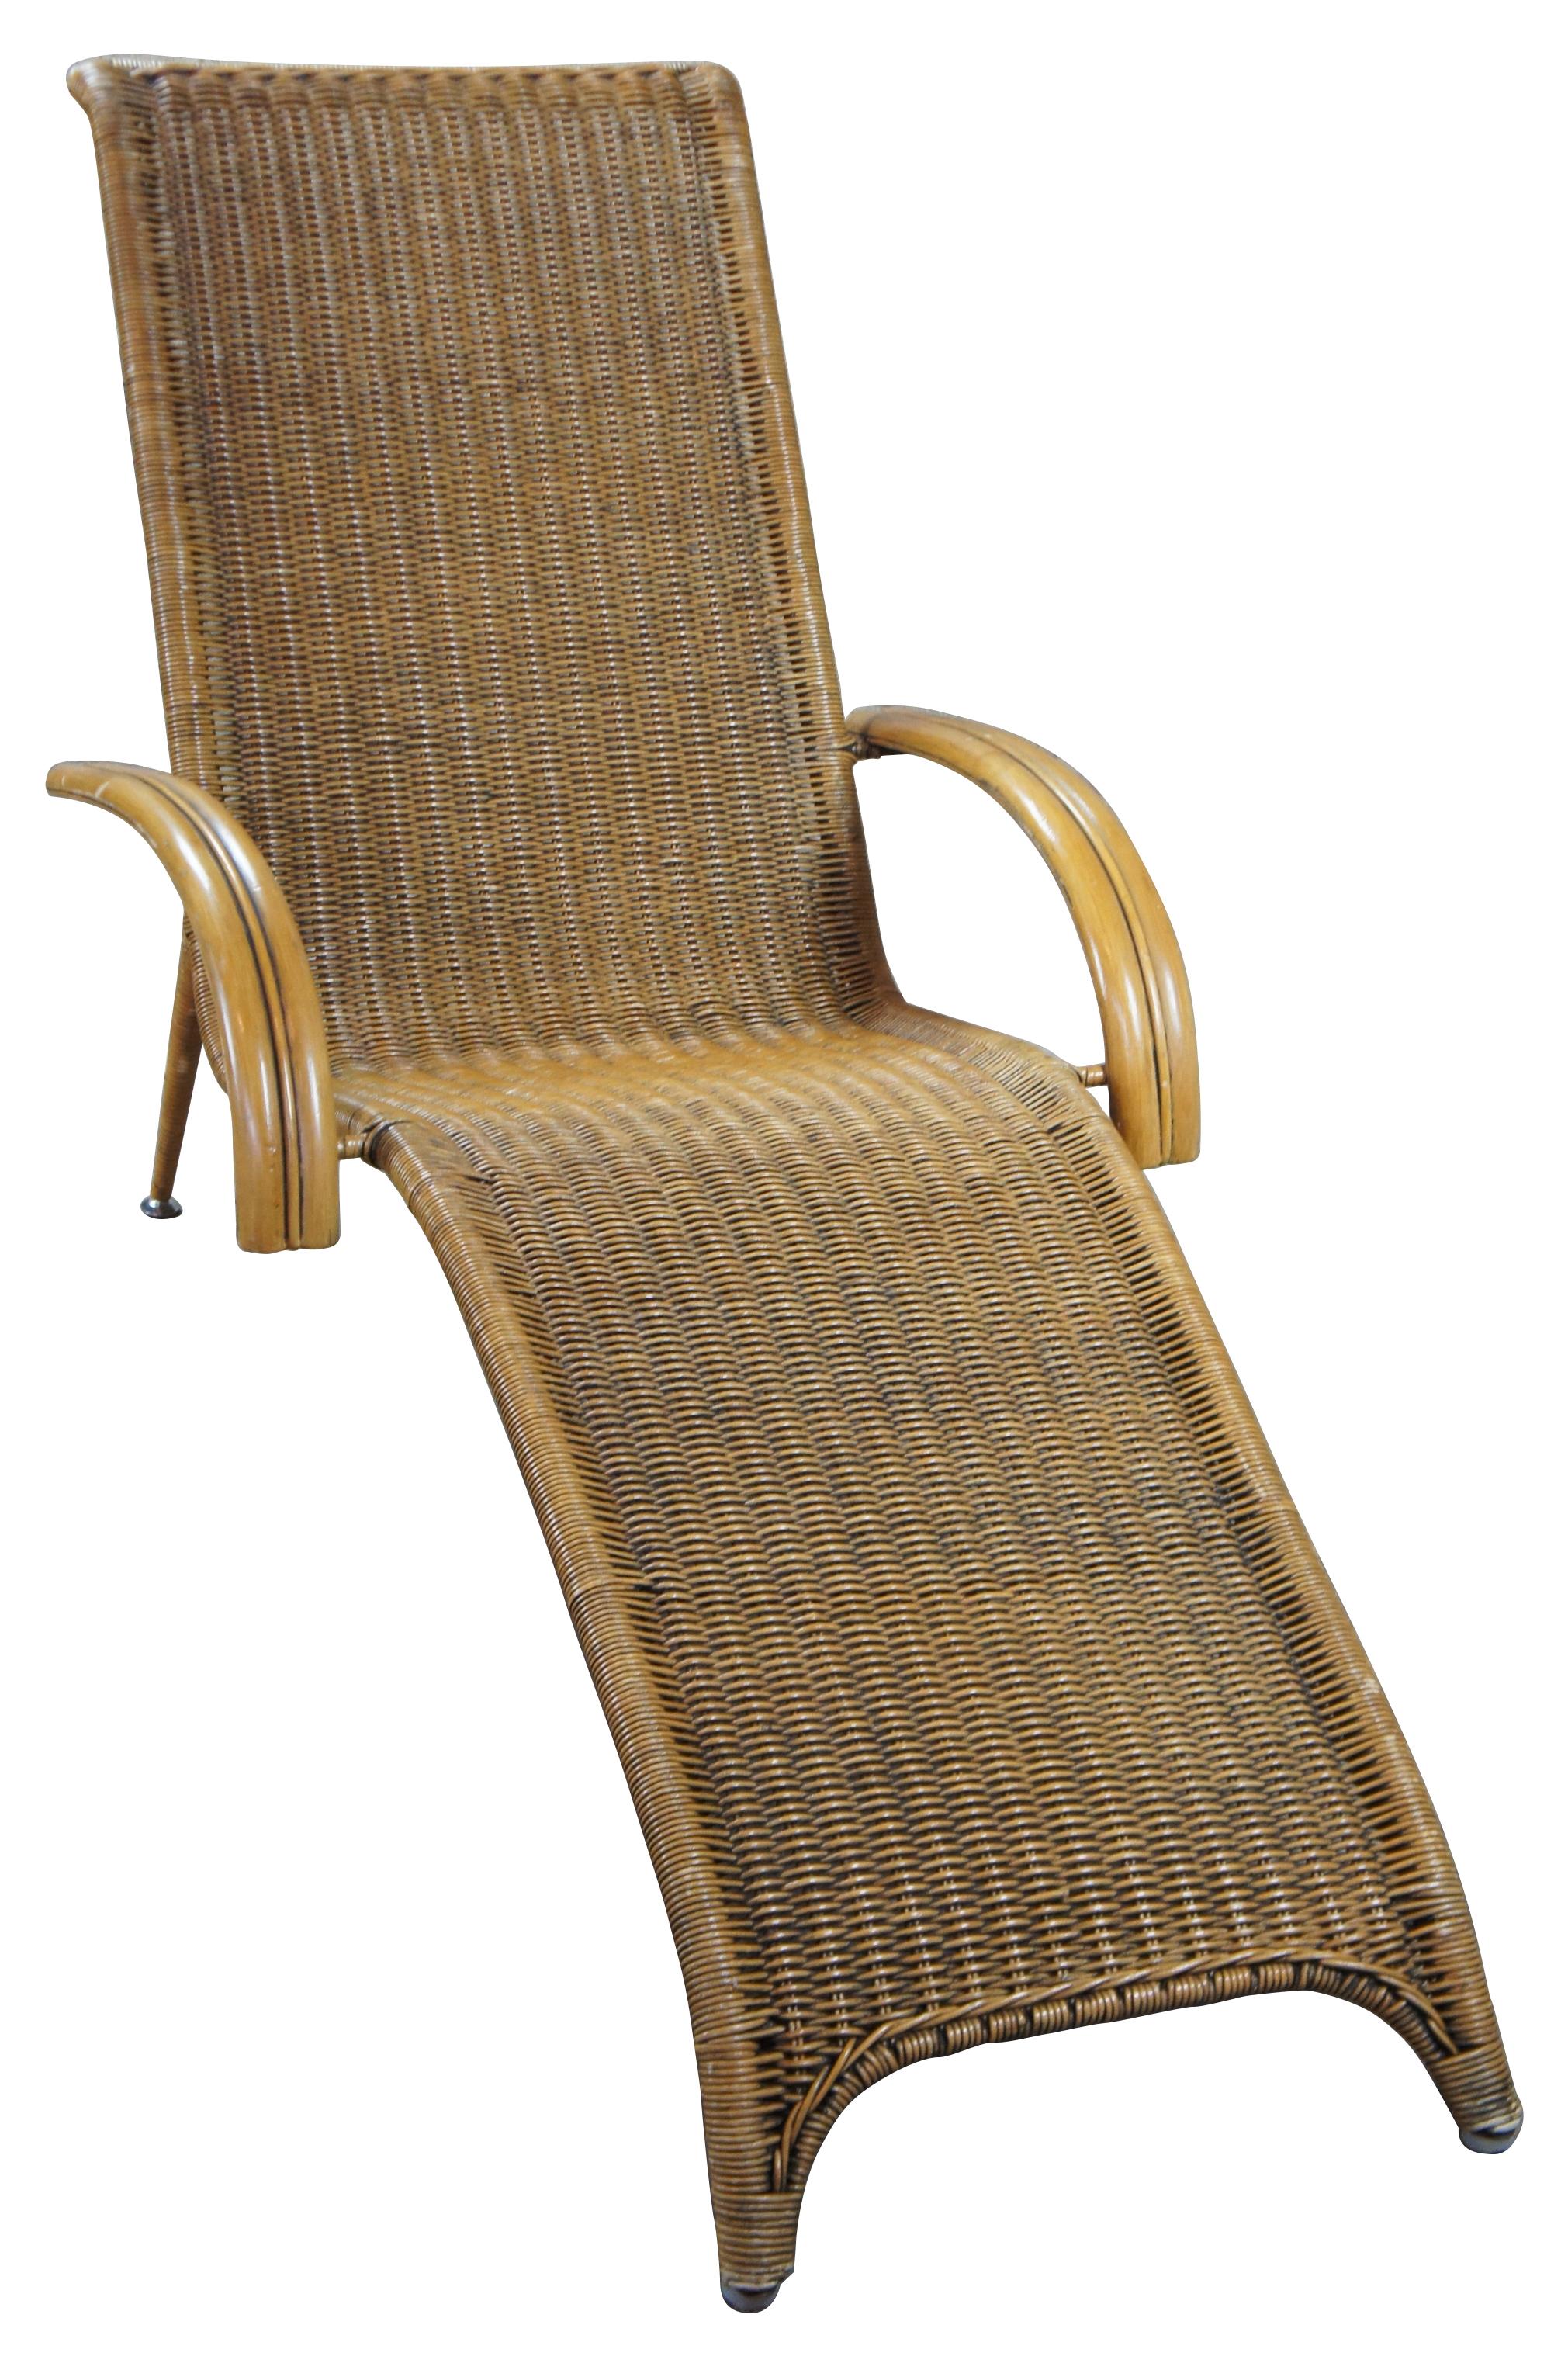 Mid-Century Modern Bauhaus Italian cane and bamboo chaise lounge chair. The perfect fit to a Minimalist or boho chic inspired space.
  